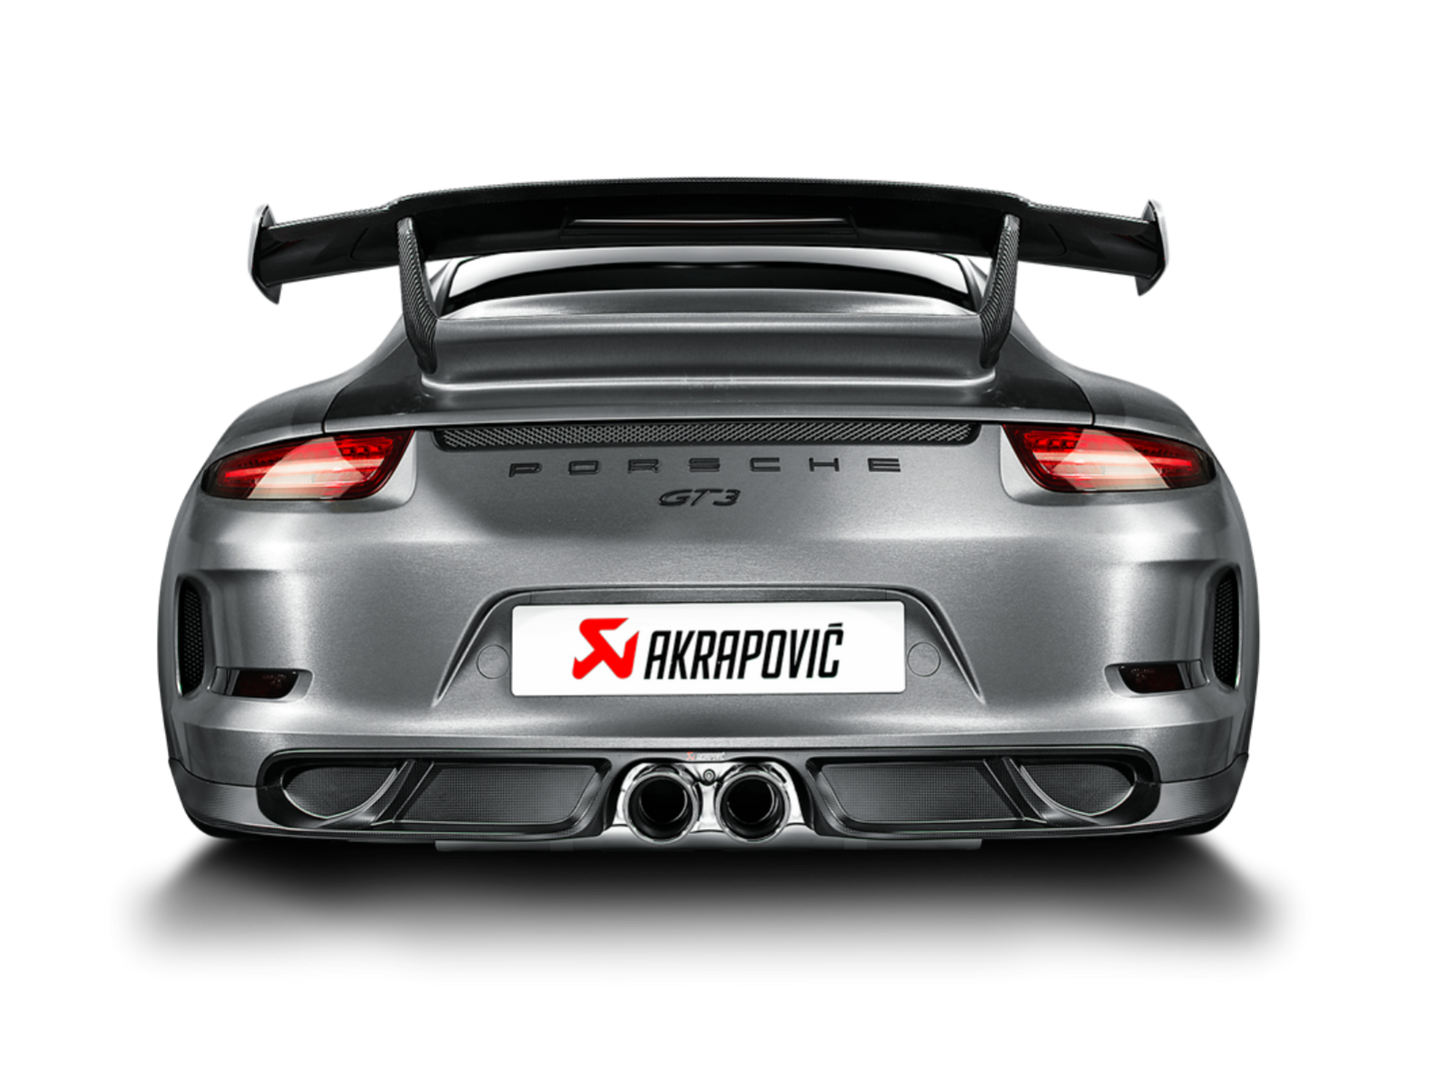 Rear view of a silver/grey Porsche GT3 with an Akrapovič twin pipe exhaust & rear carbon fibre diffuser fitted